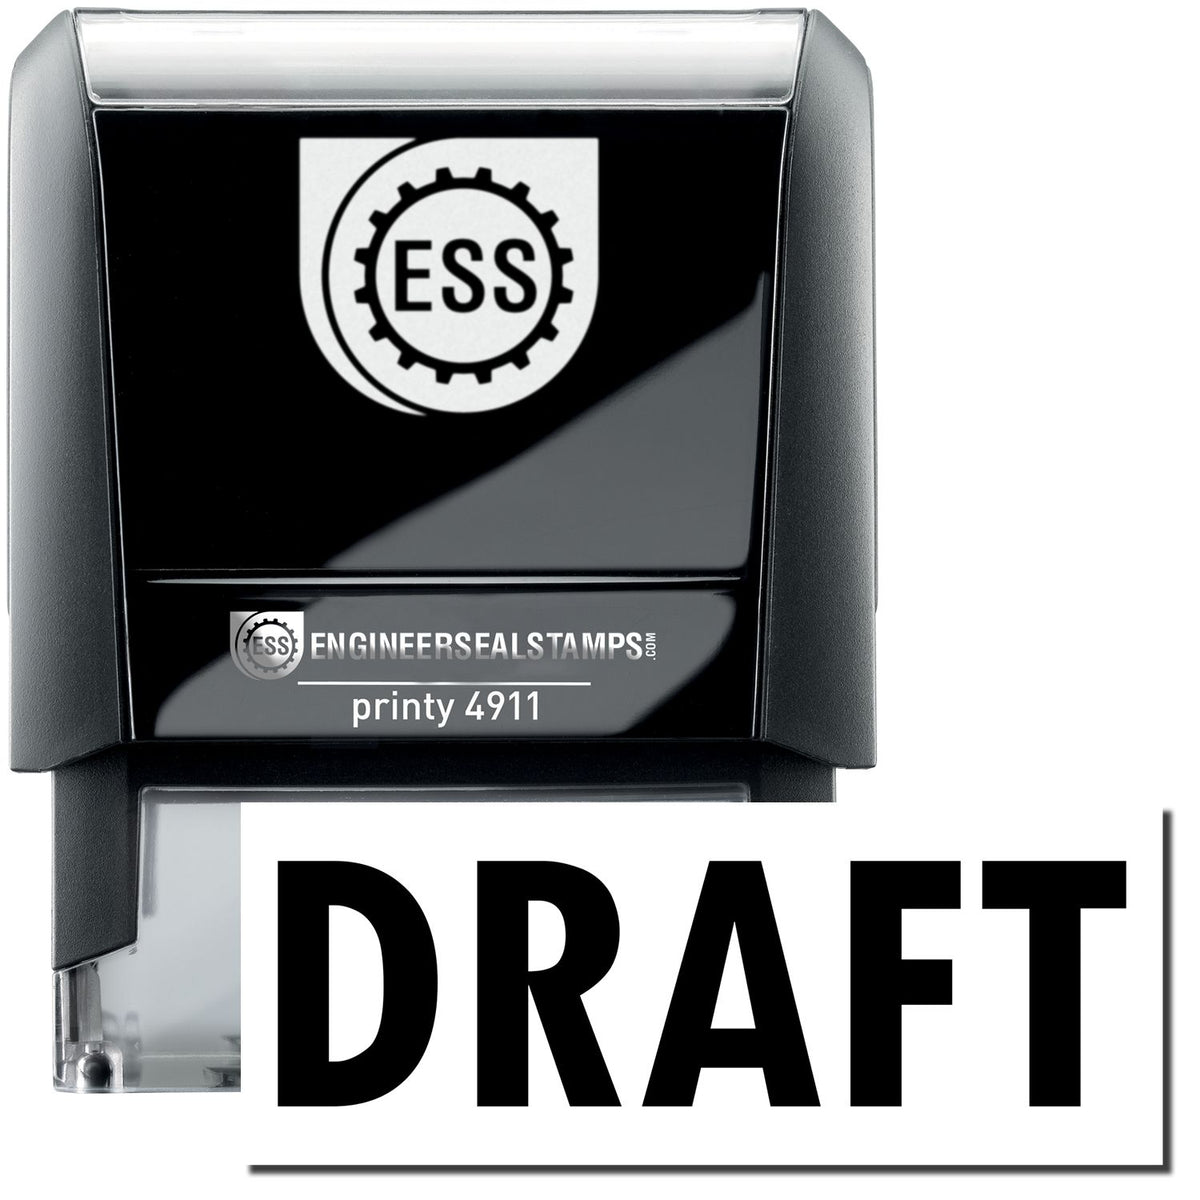 A self-inking stamp with a stamped image showing how the text &quot;DRAFT&quot; is displayed after stamping.